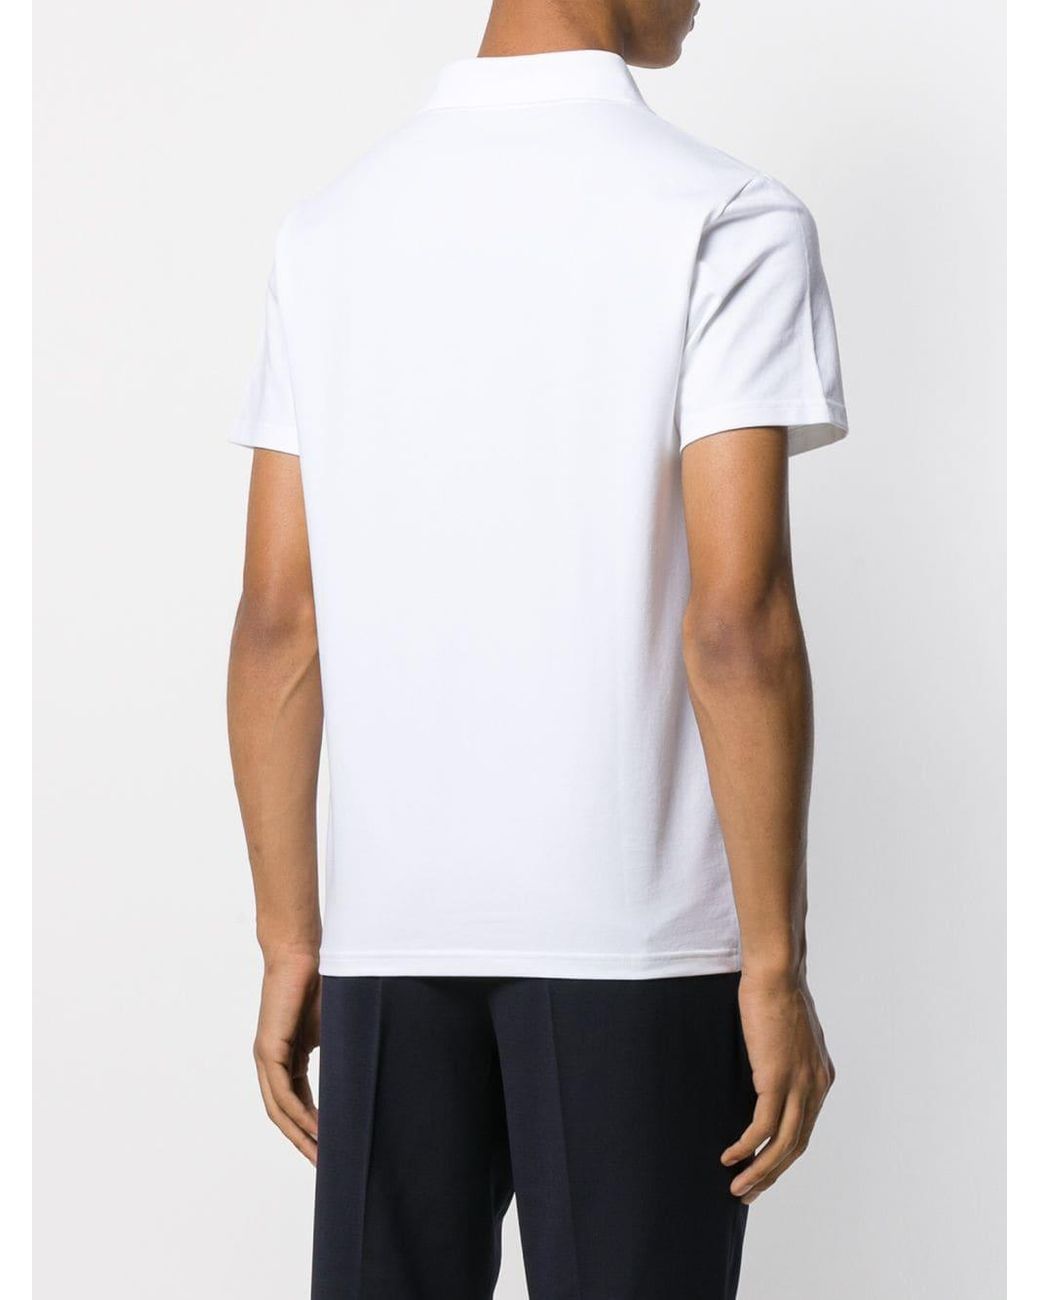 Filippa K Cotton Fitted Buttonless Polo Shirt in White for Men - Lyst